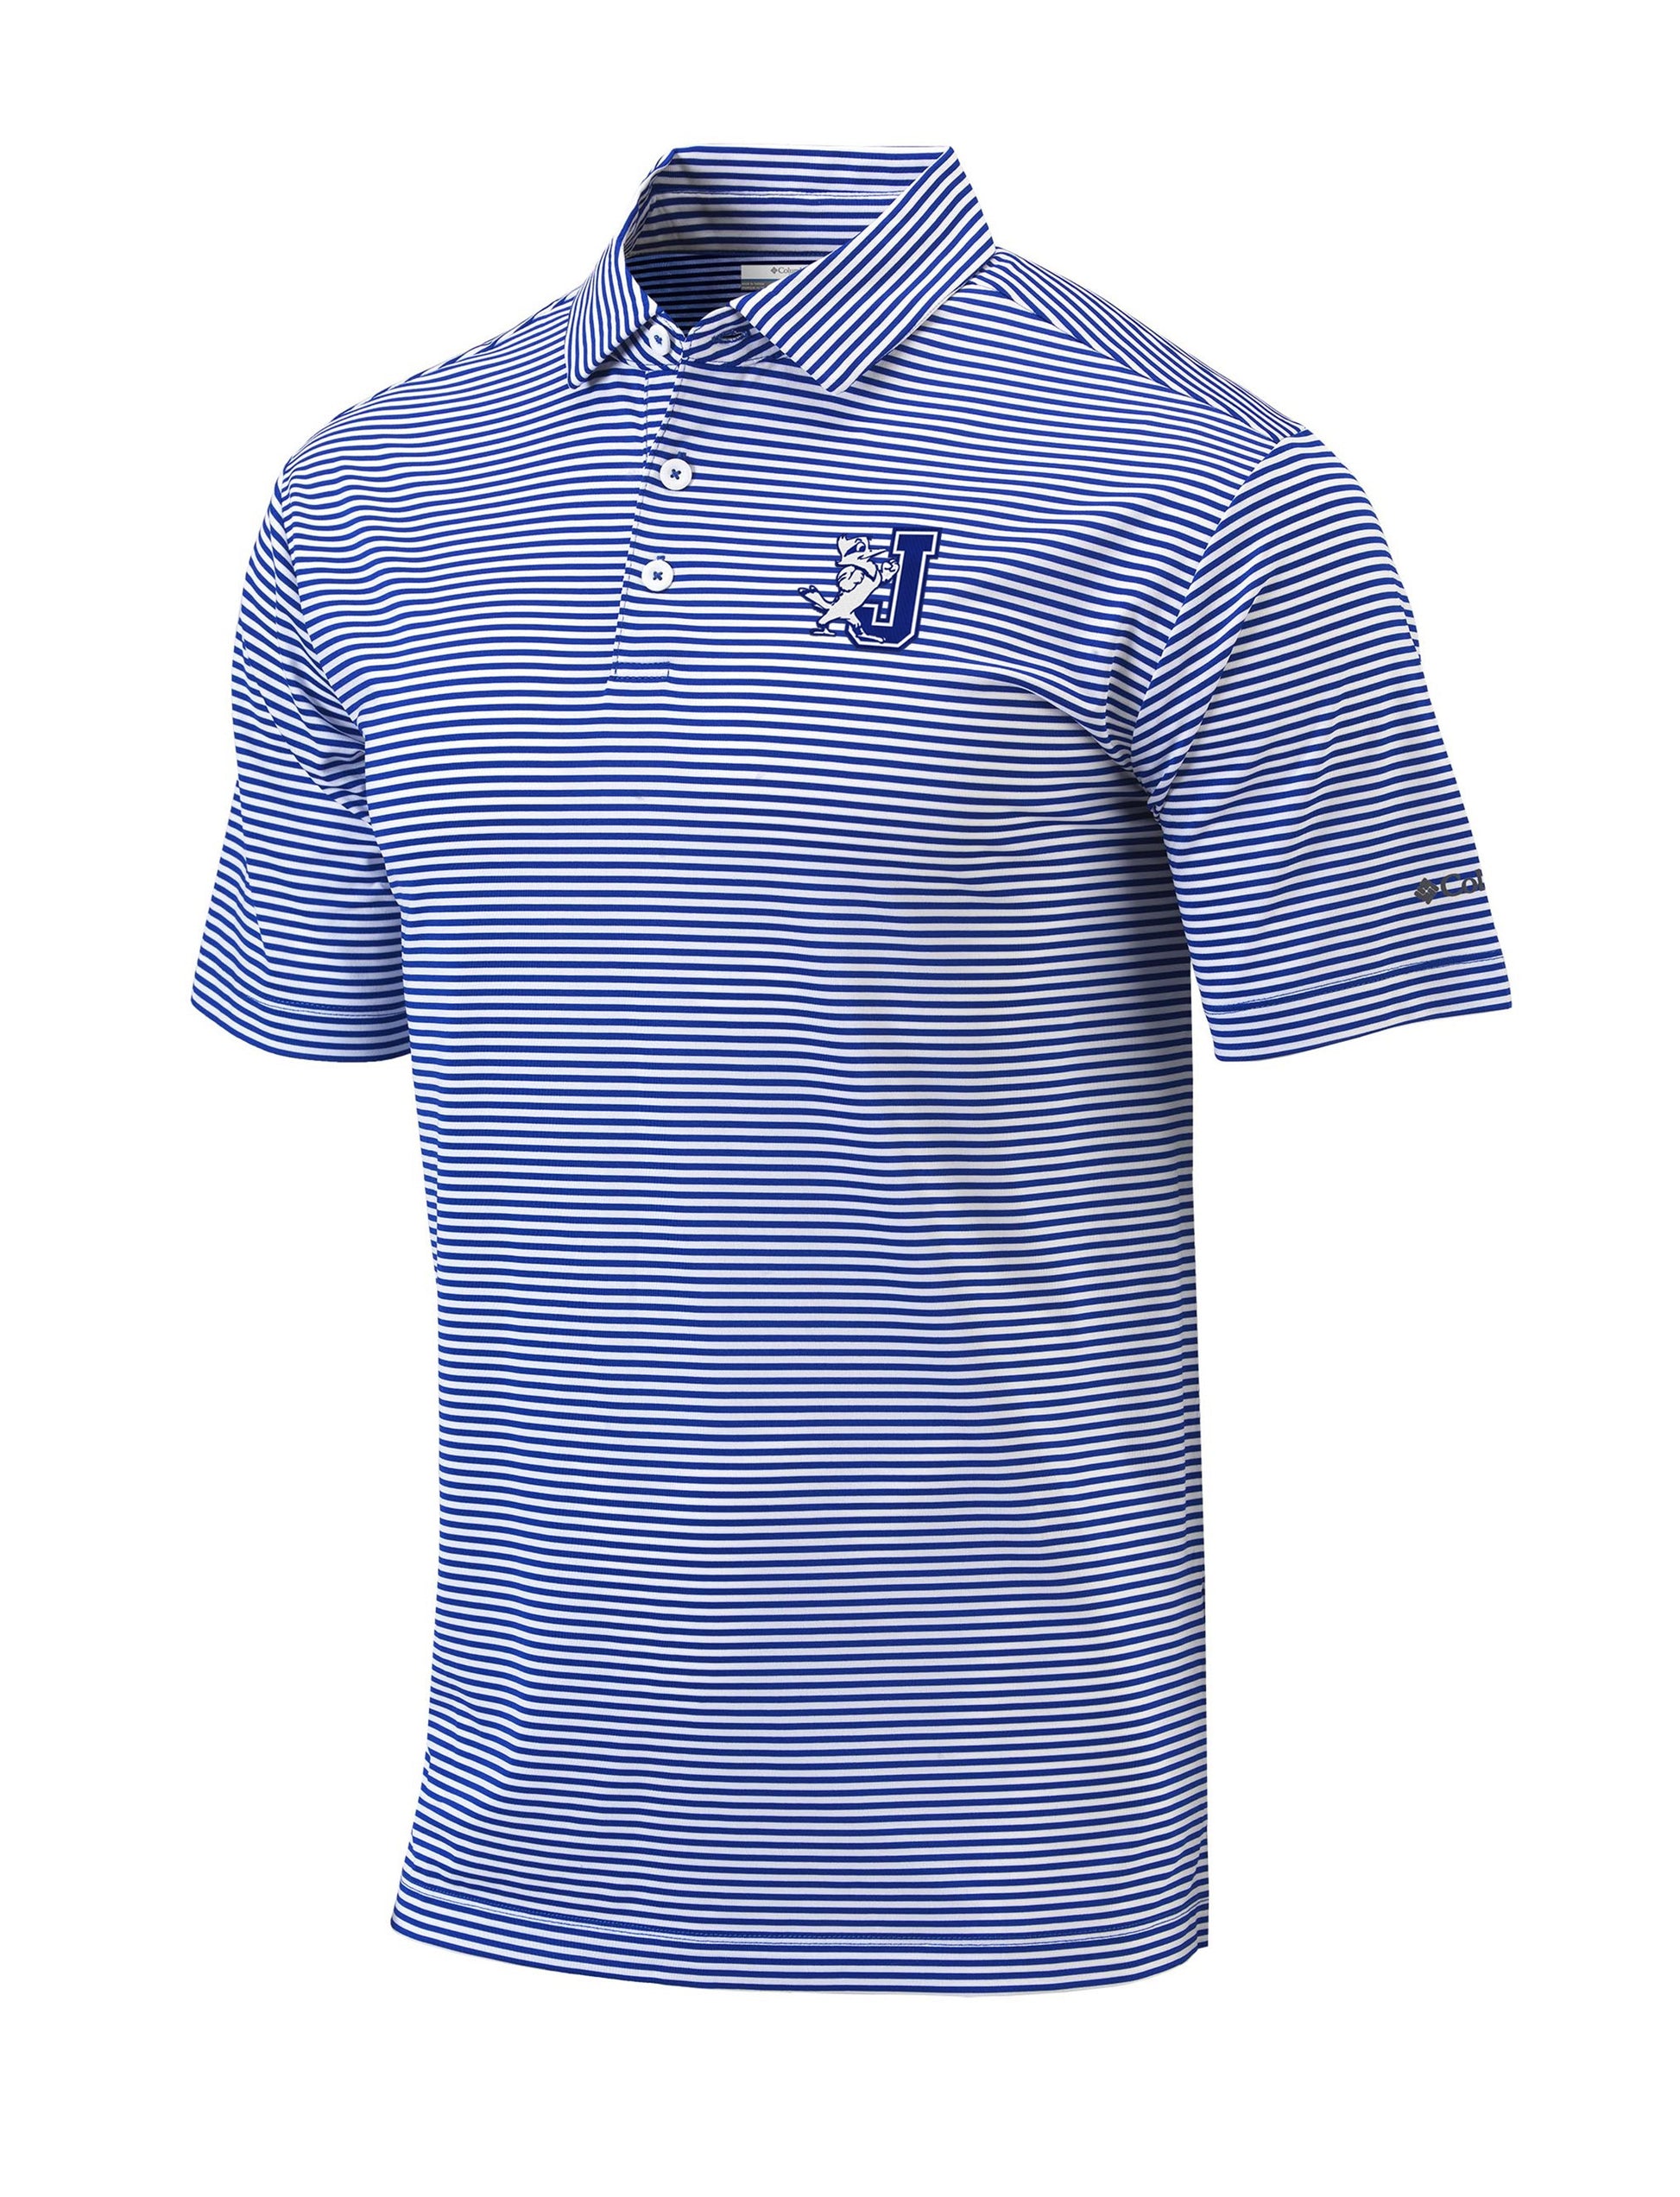 Columbia Golf.  94% Polyester/6% Spandex.  Omni Wick. Omni Shade UPF30 sun protection. Self fabric collar with sewn in collar stays.  J/Jayson embroidered logo.